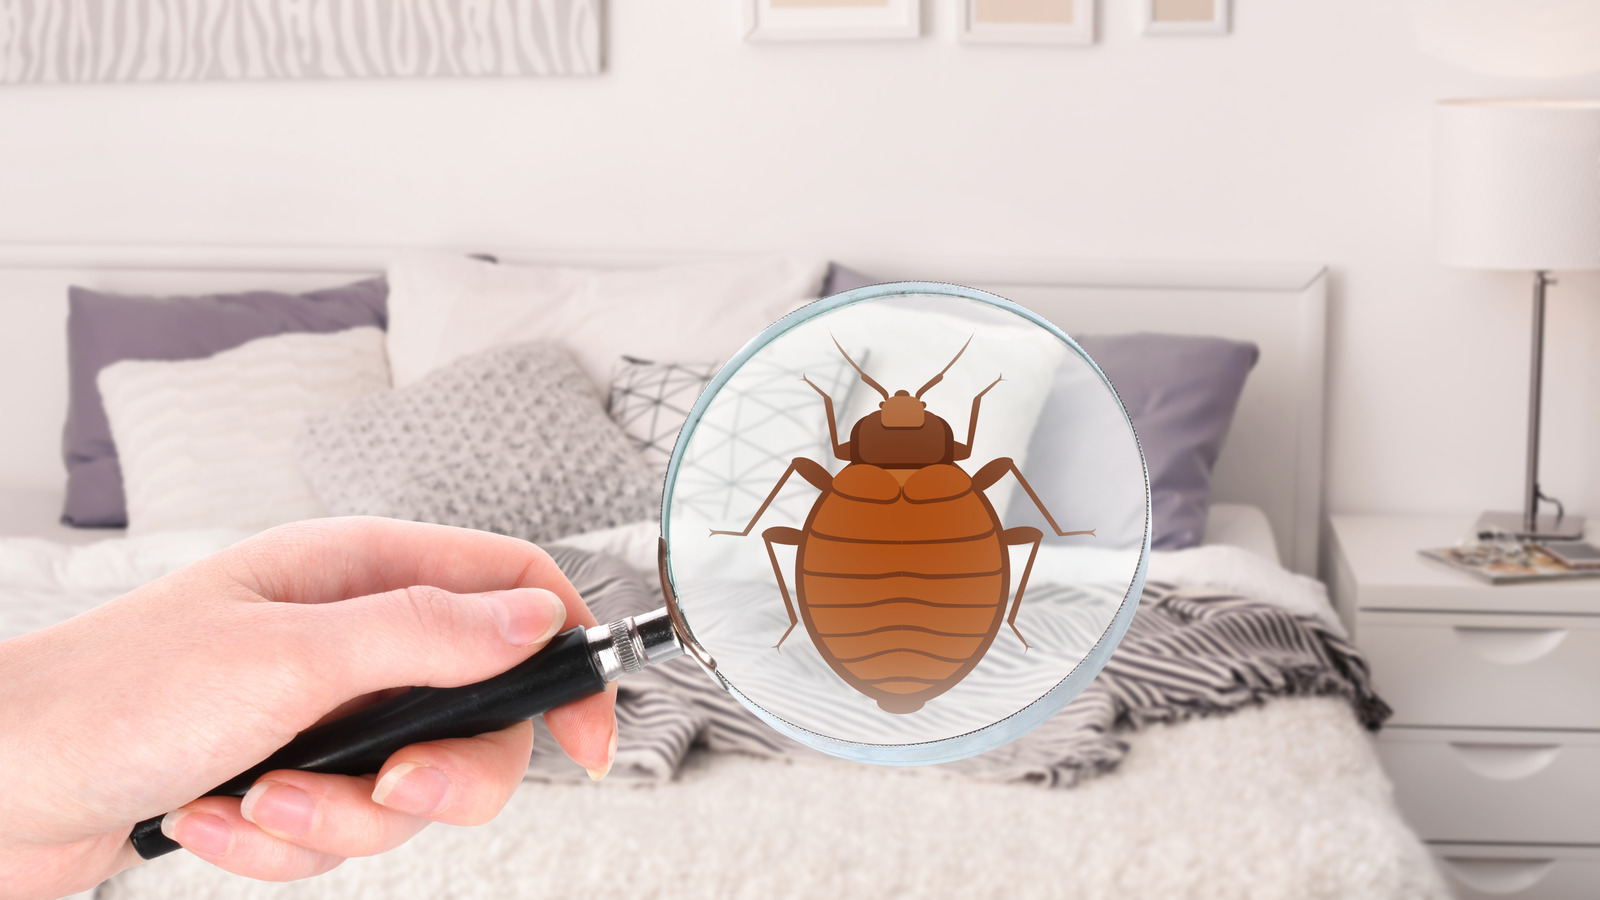 https://www.housedigest.com/img/gallery/the-ultimate-checklist-for-diy-bed-bug-treatment/l-intro-1677522361.jpg